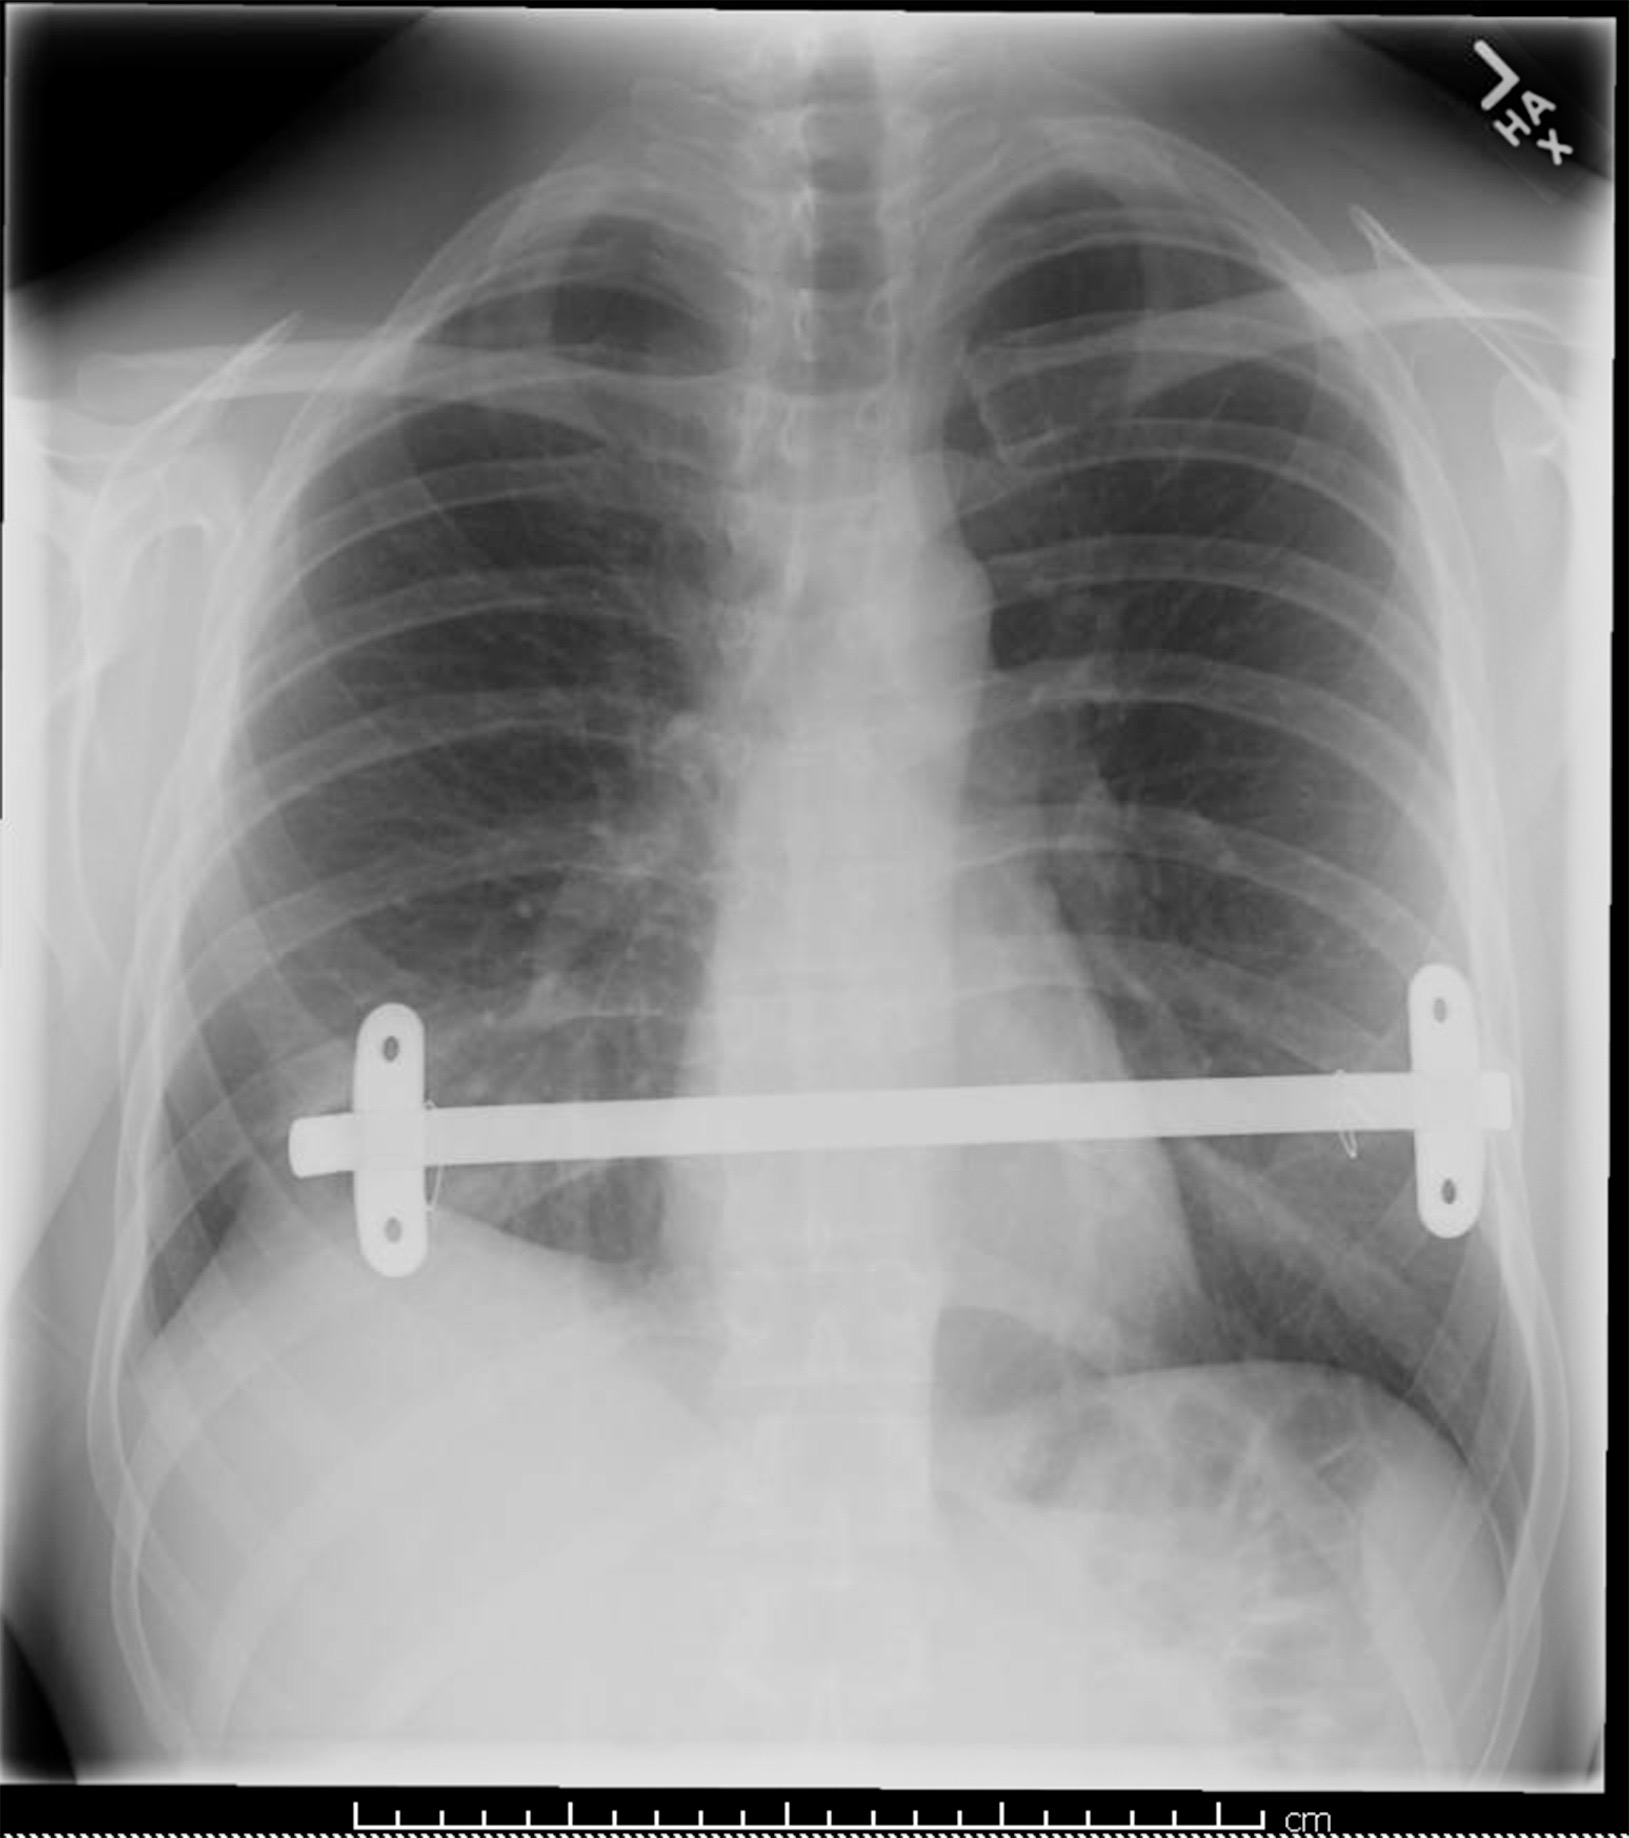 This X-ray shows a surgically inserted metal bar that will help to correct a sunken chest, a somewhat rare condition.